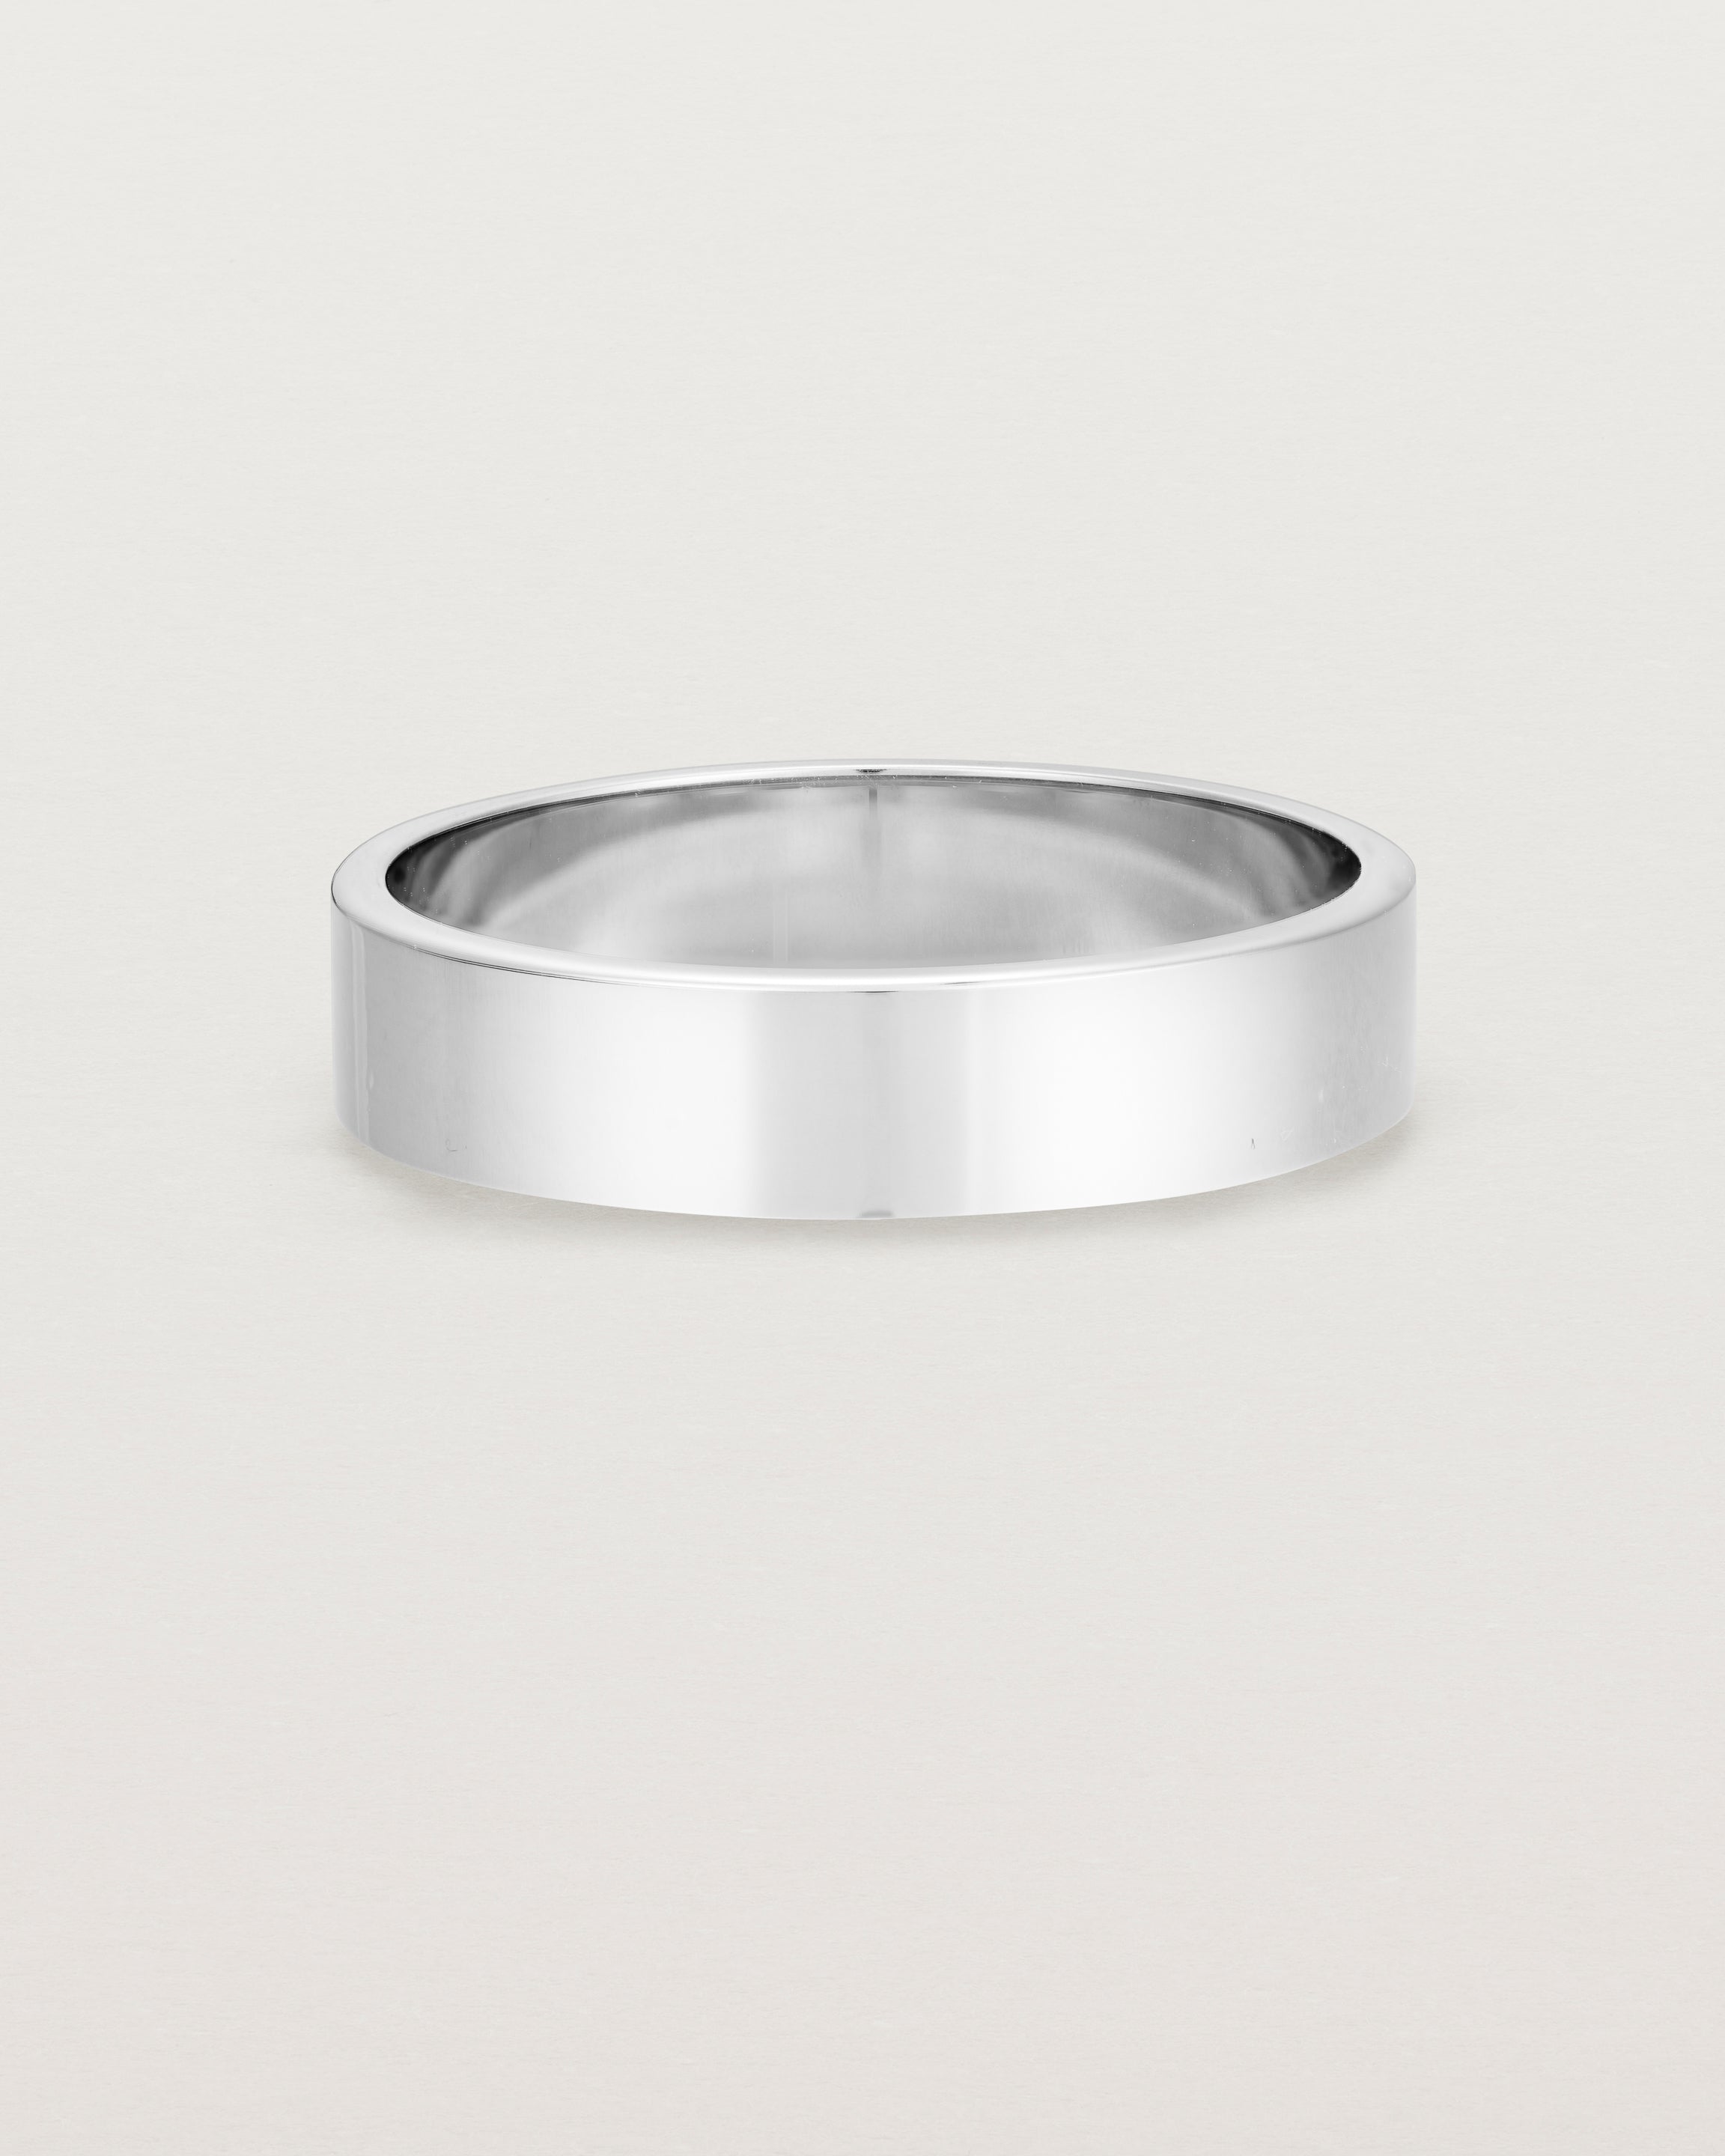 Our square profile, 5mm flat wedding band, crafted in white gold